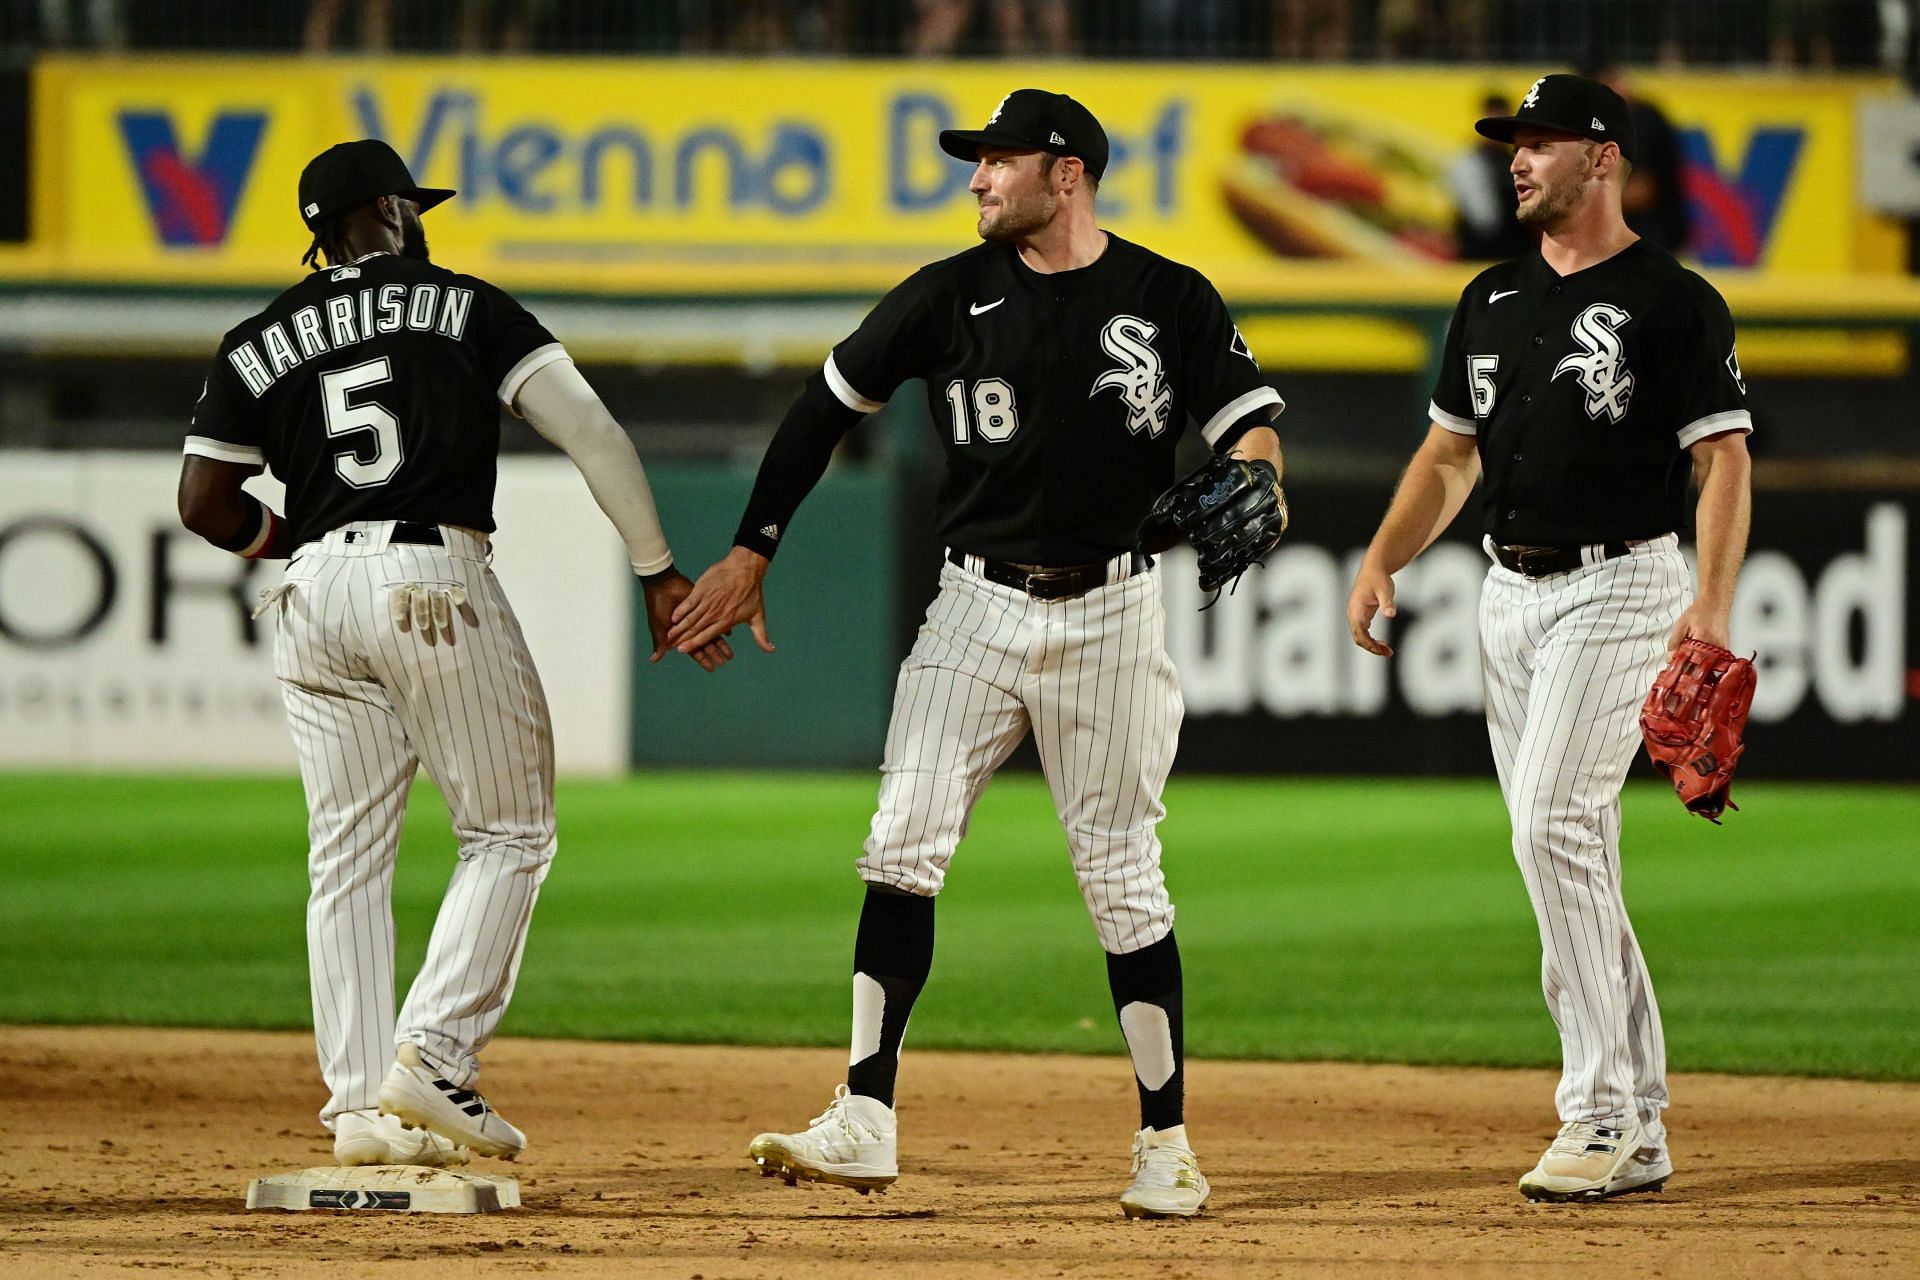 The White Sox travel to take on the Rockies.